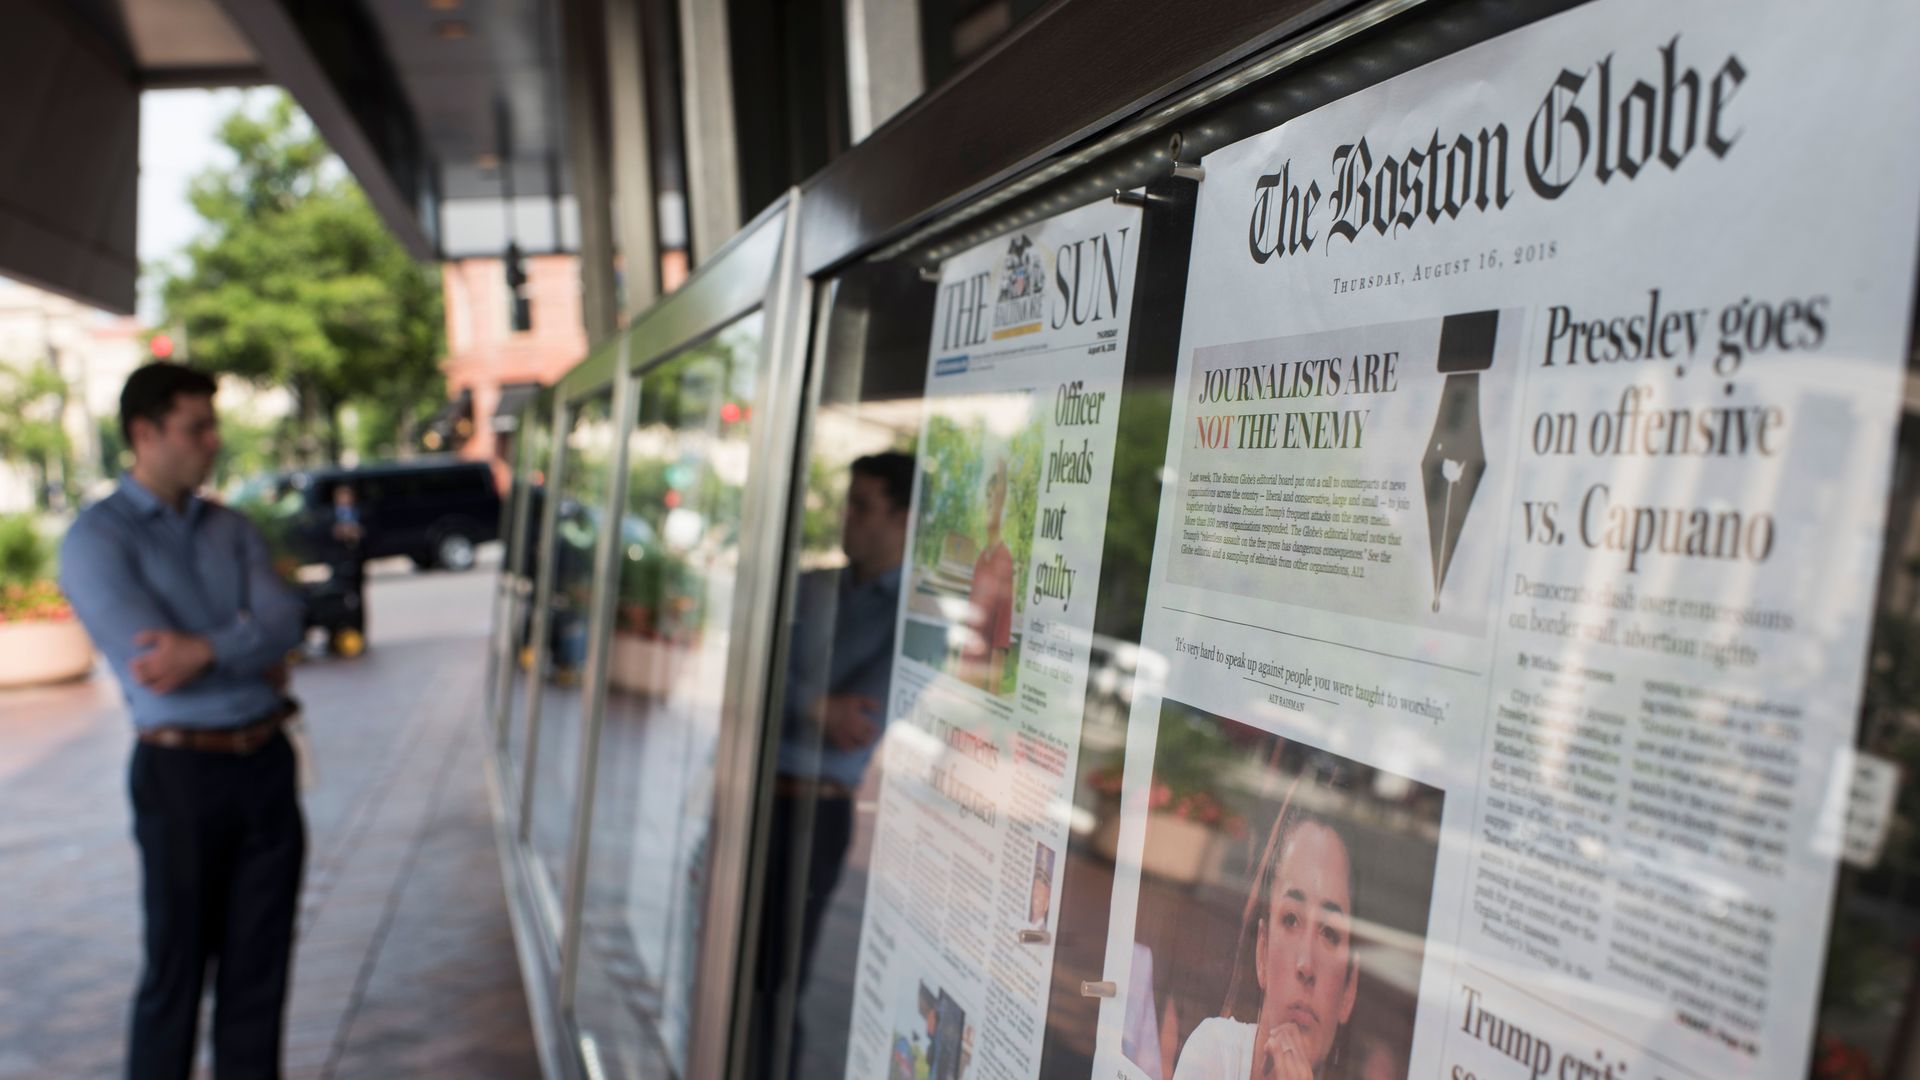 The Boston Globe's front page at the Newseum